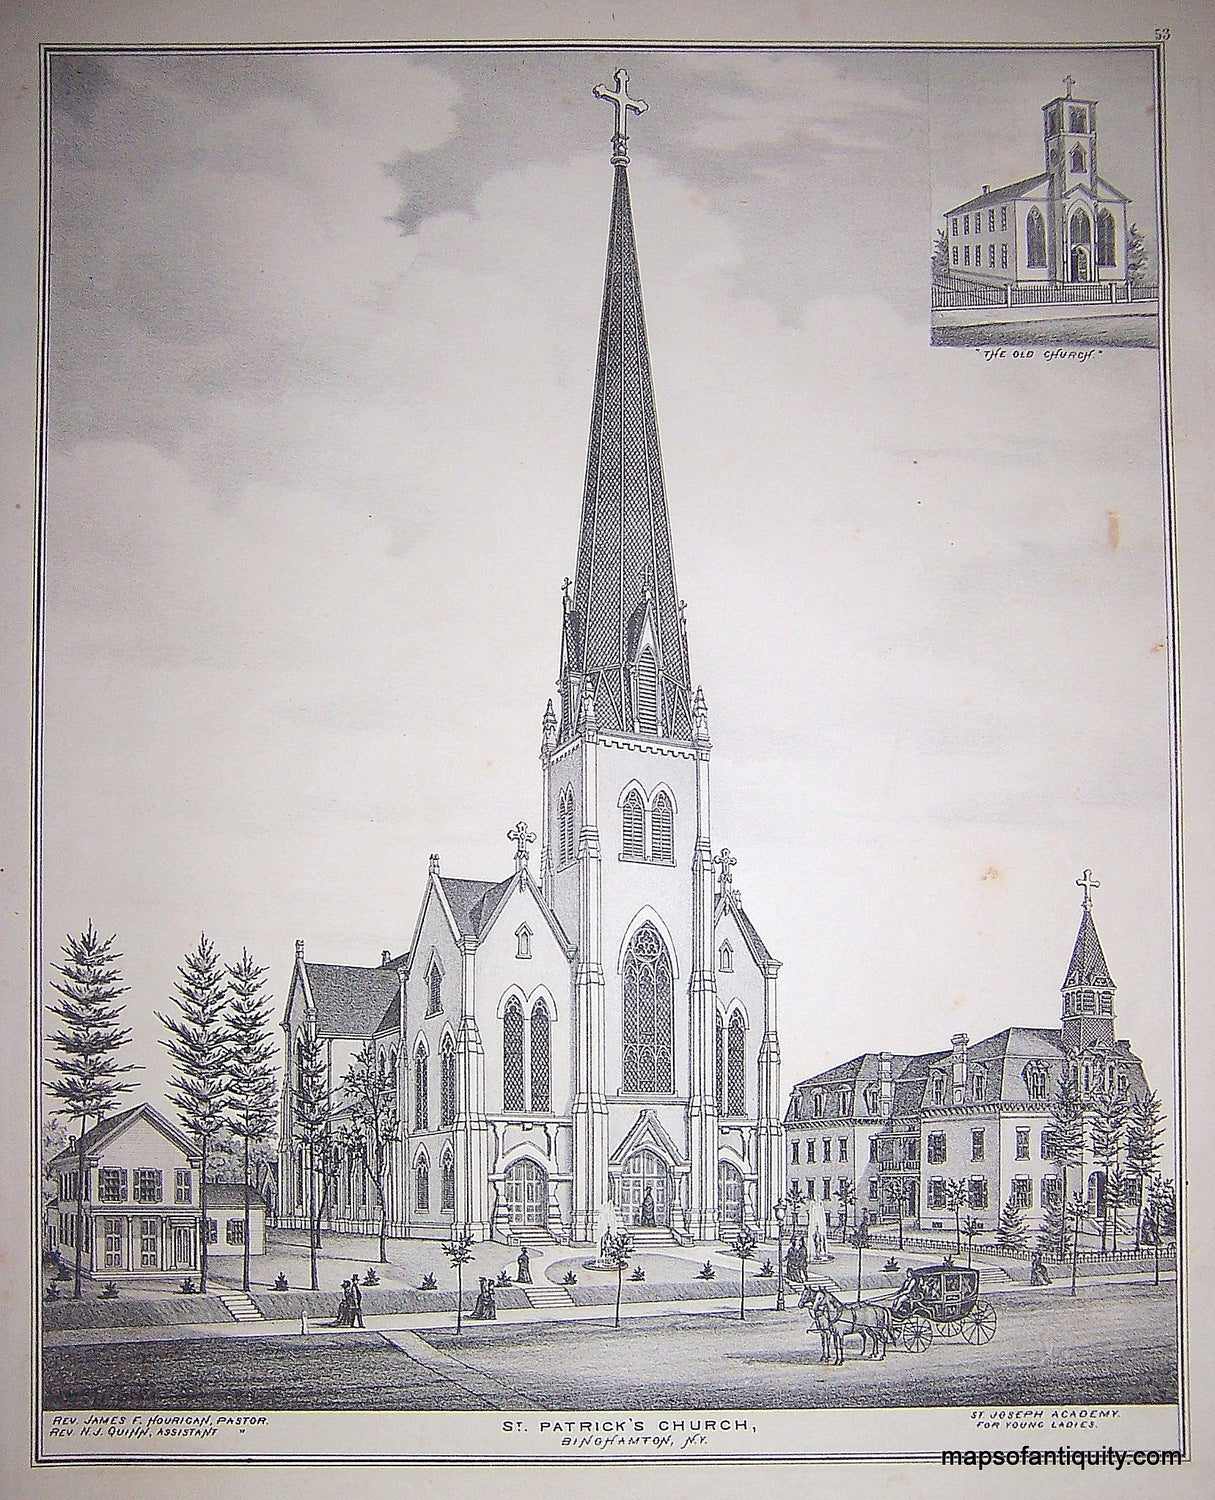 Black-and-White-Engraving-St.-Patrick's-Church-(NY)-United-States-New-York-1876-Everts-Ensign-&-Everts-Maps-Of-Antiquity